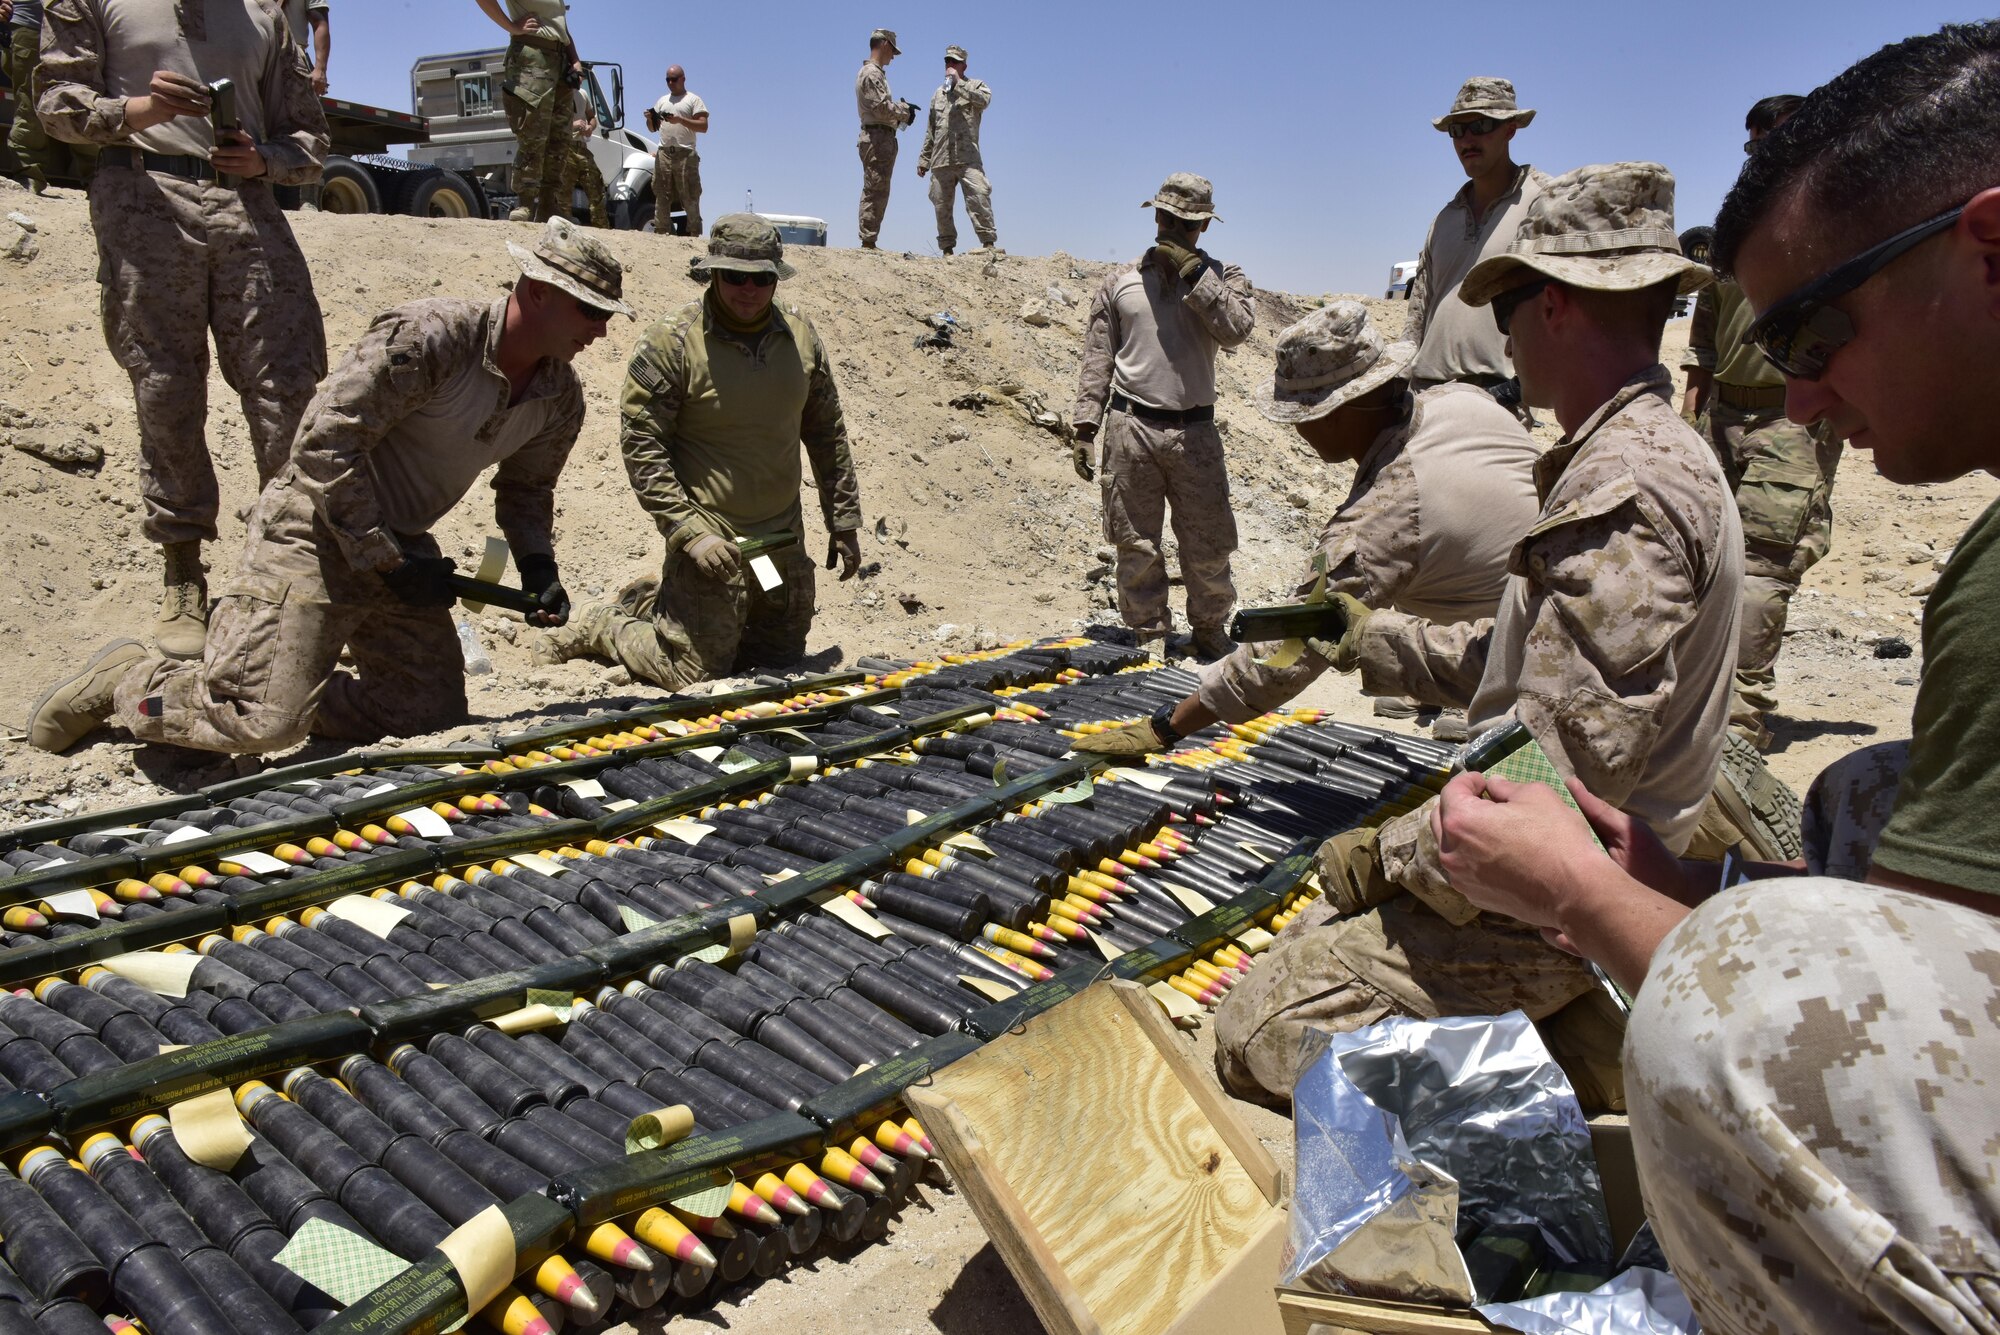 U.S. Air Force 407th Expeditionary Civil Engineer Squadron explosive ordnance disposal (EOD) and U.S. Marine Corps Special Marine Air Ground Task Force EOD prepare explosives on munitions during a disposal operation in Southwest Asia, June 6, 2017. Additional support from Italian Air Force and 407th Air Expeditionary Group assisted in completing the task of disposing of more than 5,000 pieces of expired 30 mm rounds and aircraft decoy flares. EOD’s mission is to protect personnel, resources, and the environment from hazardous explosive ordnance, improvised explosive devices and weapons of mass destruction, which may include; incendiary, chemical, biological, radiological, and nuclear hazards.  They specialize in tools, techniques and personal protective equipment to detect or identify, monitor, evaluate, interrogate, mitigate, render safe, recover, and disposal operations on ordnance or devices delivered, placed, or made dangerous by any circumstances. (U.S. Air Force photo by Senior Airman Ramon A. Adelan)